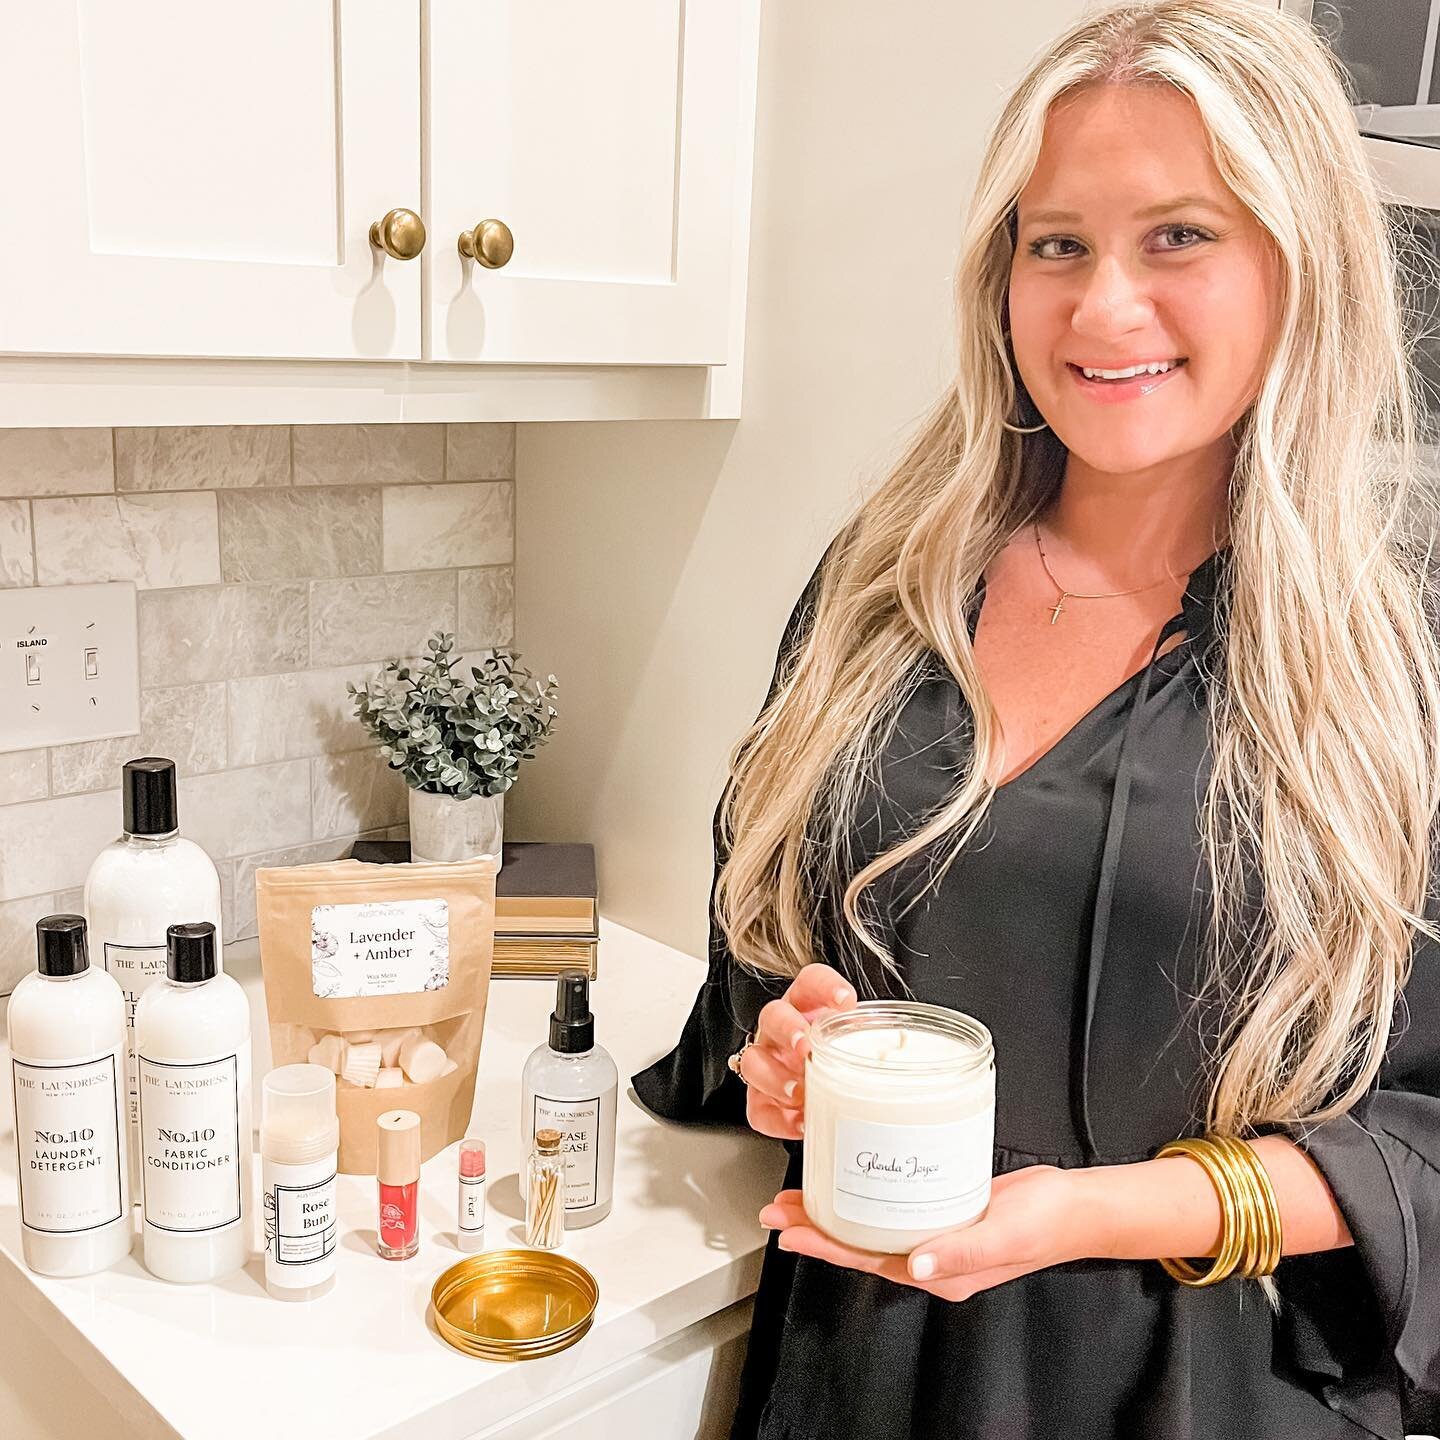 It&rsquo;s been a few days since I posted in stories about my goodie box that @magnoliasonmain414 sent me and now that I&rsquo;ve had a few days to try all the products out and get a feel for all of them I wanted to share how much I loved these produ